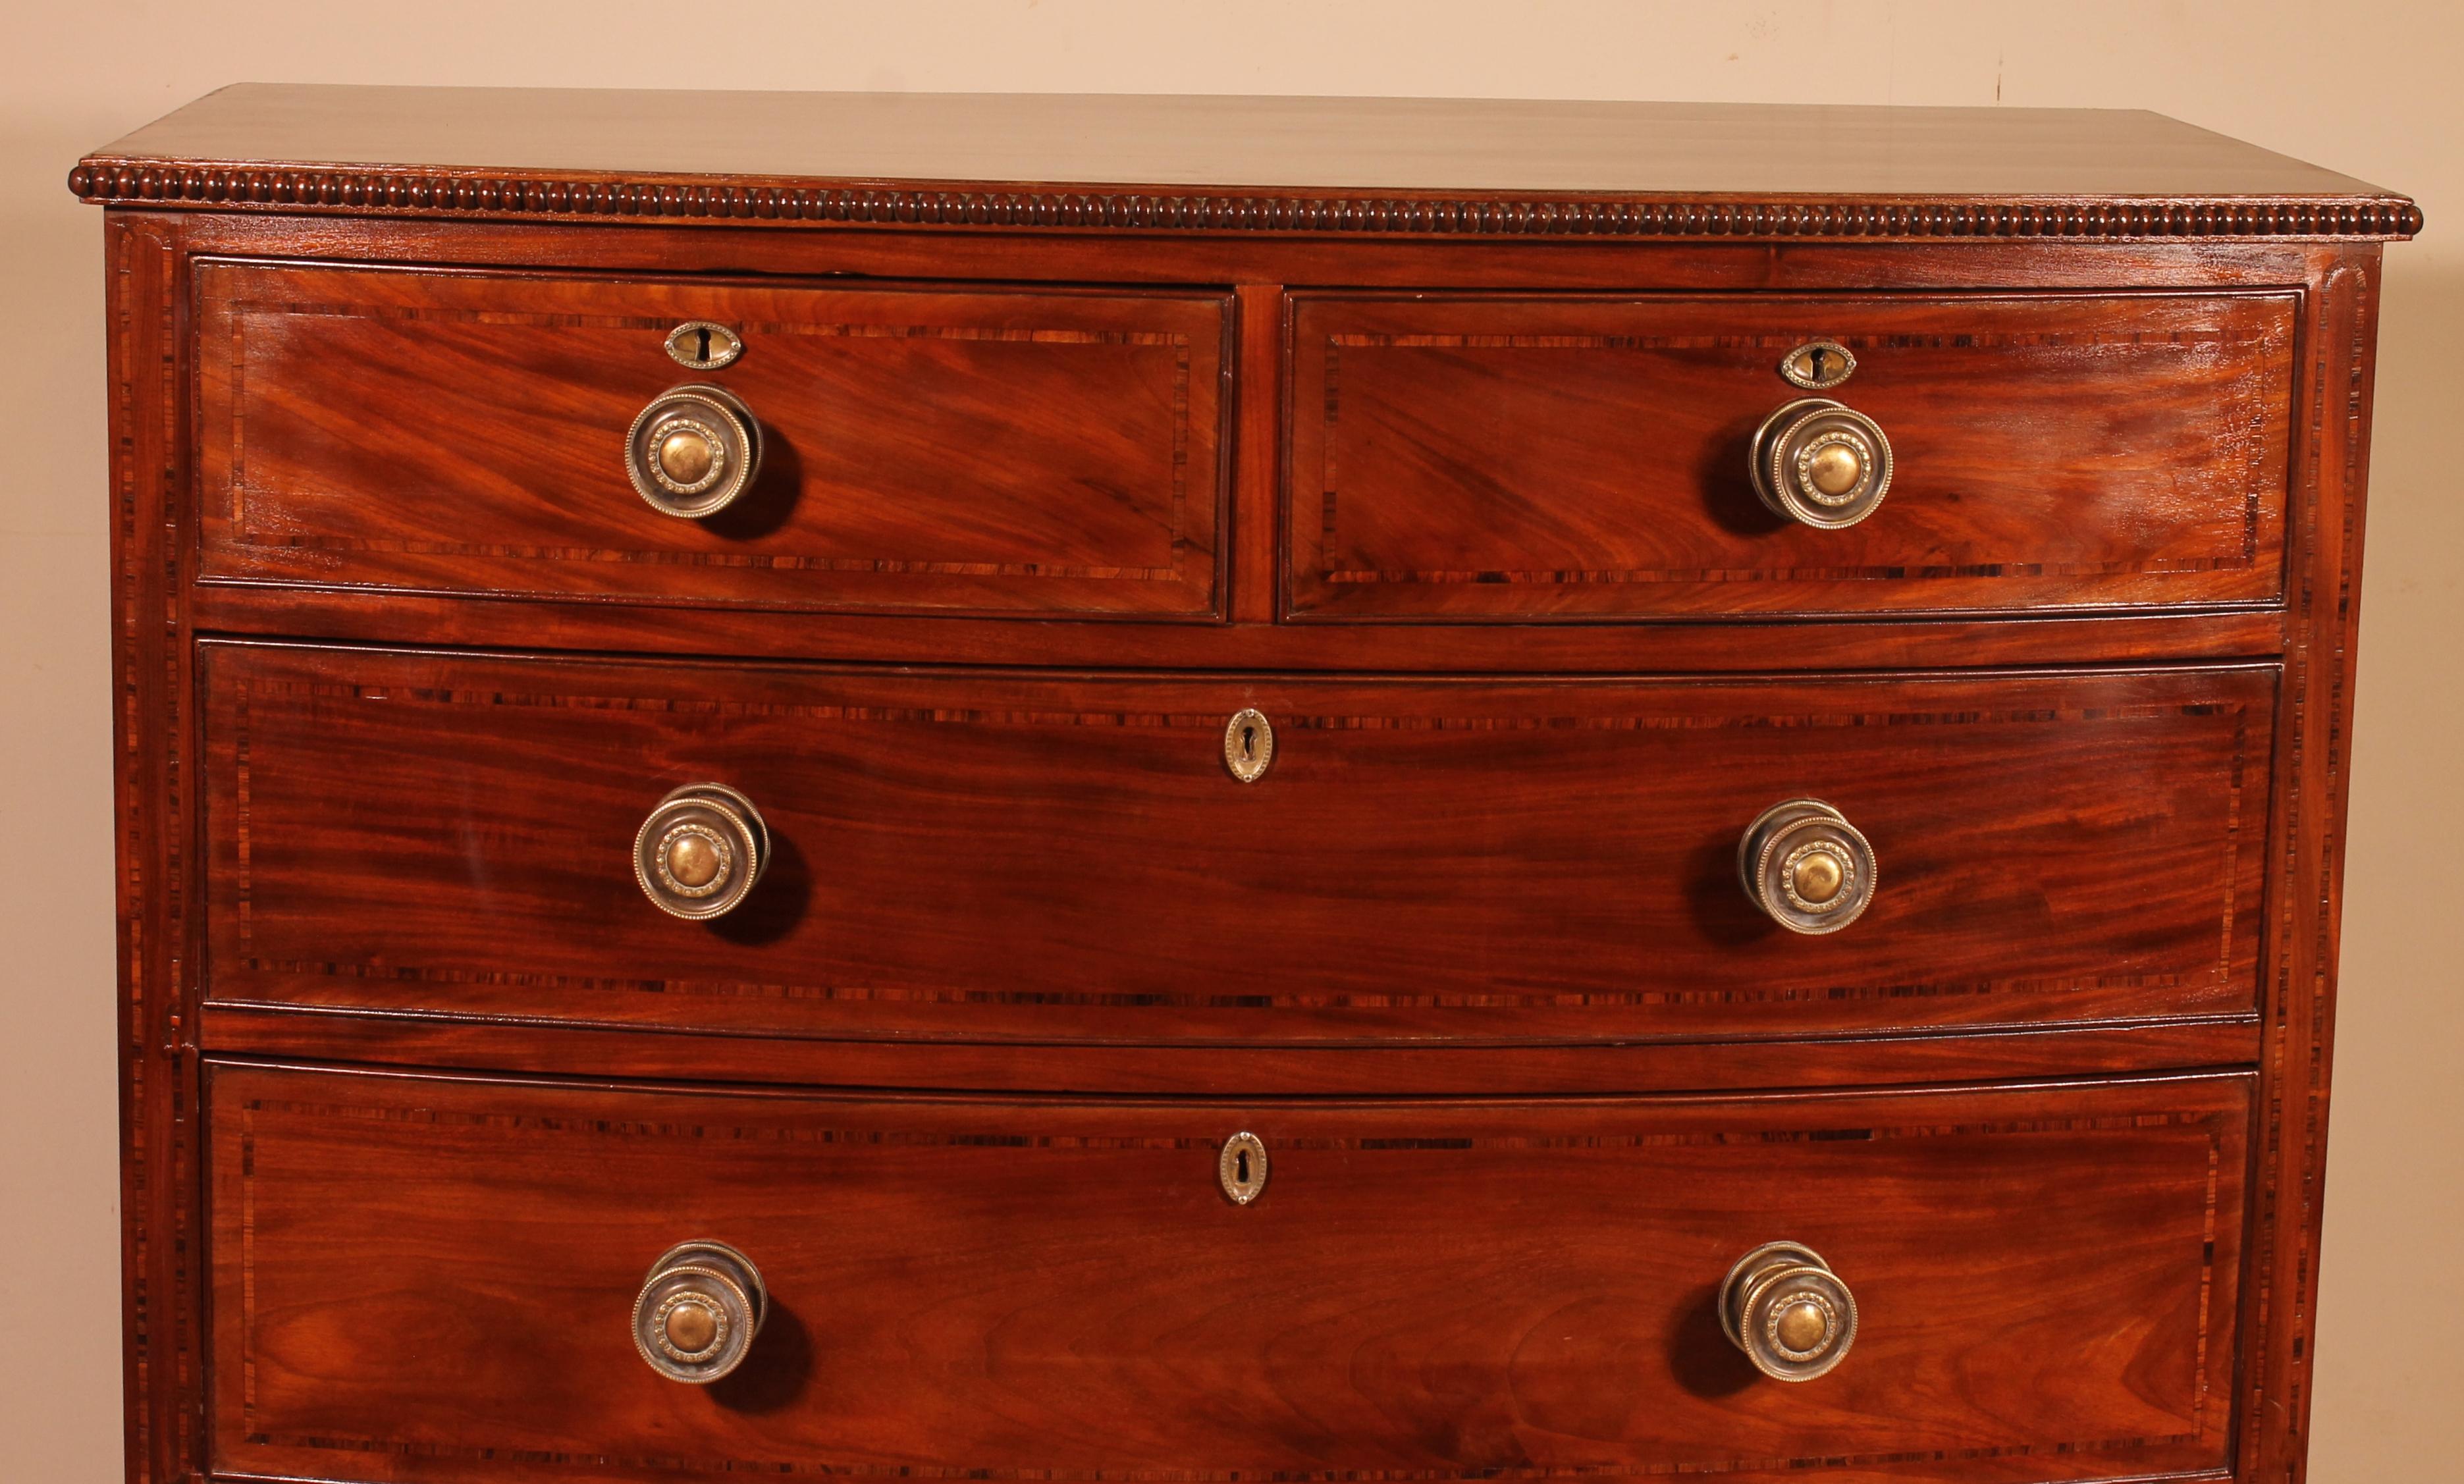 A fine bowfront chest of drawers from the end of the 18th century - beginning of the 19th century circa 1800-England
Chest of drawers of very good quality which has many inlays on the top, drawers as well as on the two uprights.
This is rare and a